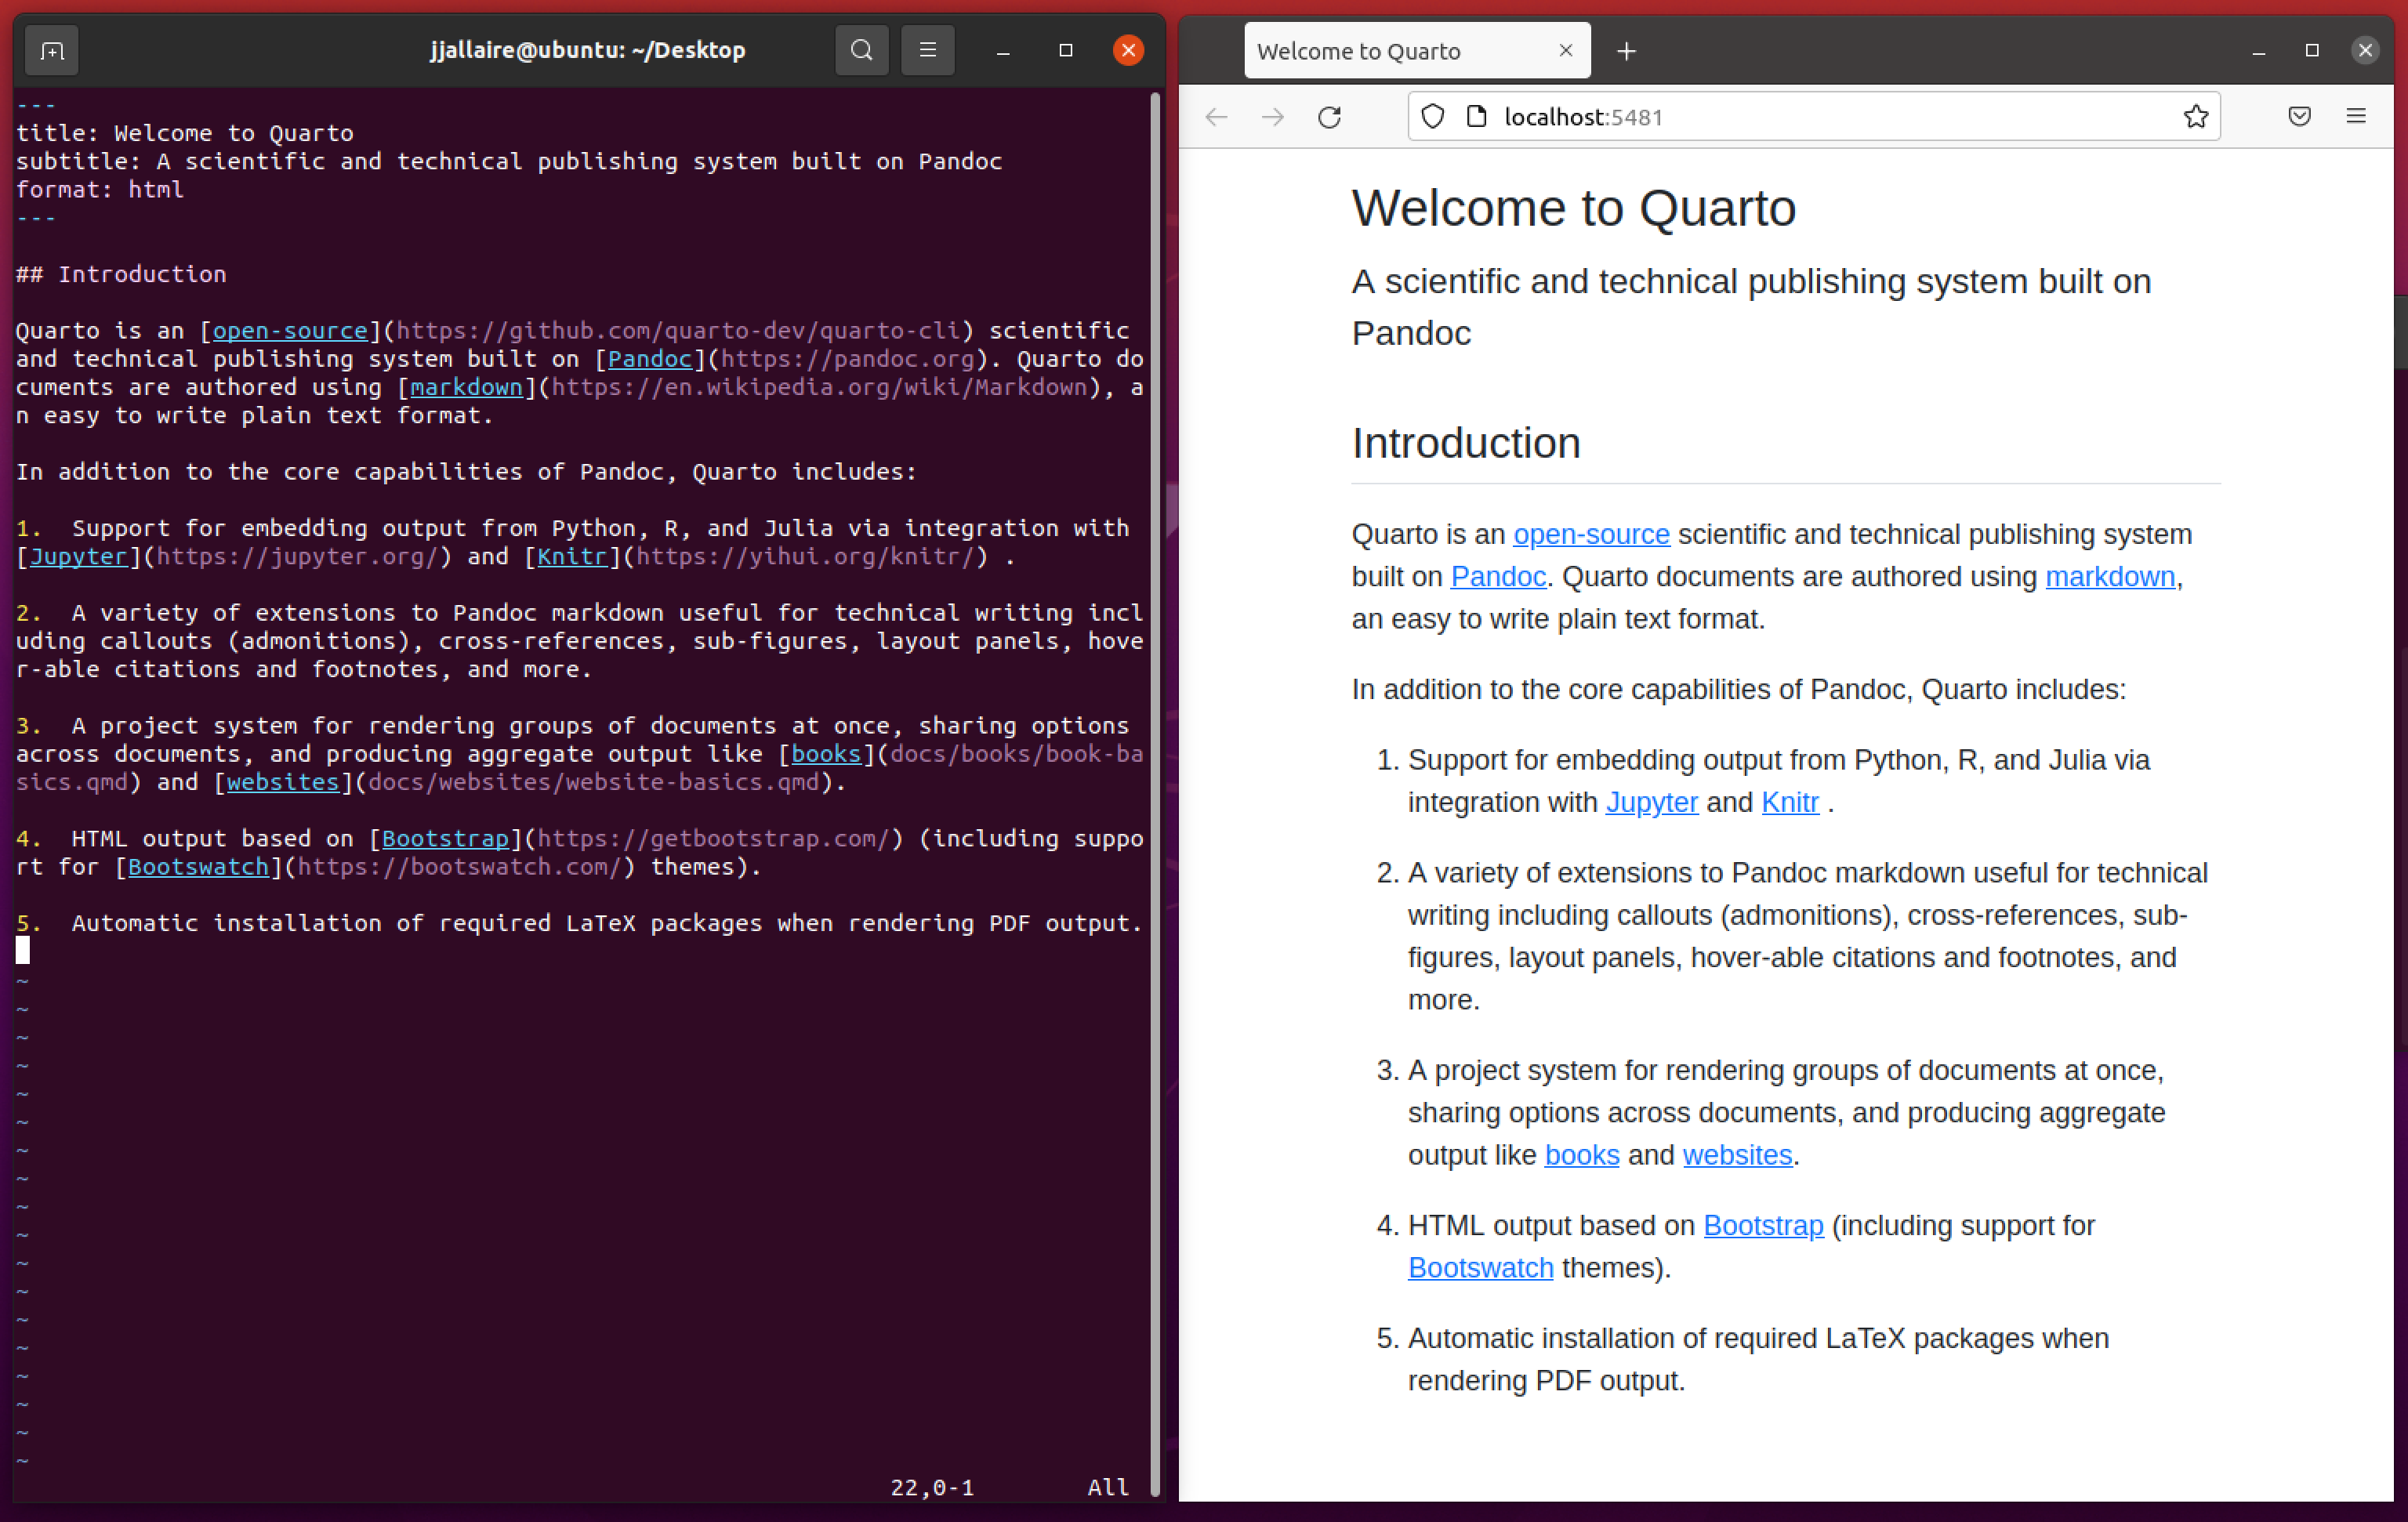 Two application windows arranged side by side. A Quarto document that contains the contents of the Welcome page of this website is open on the right. The contents of this document are rendered in a web browser by Quarto in the window on the right.